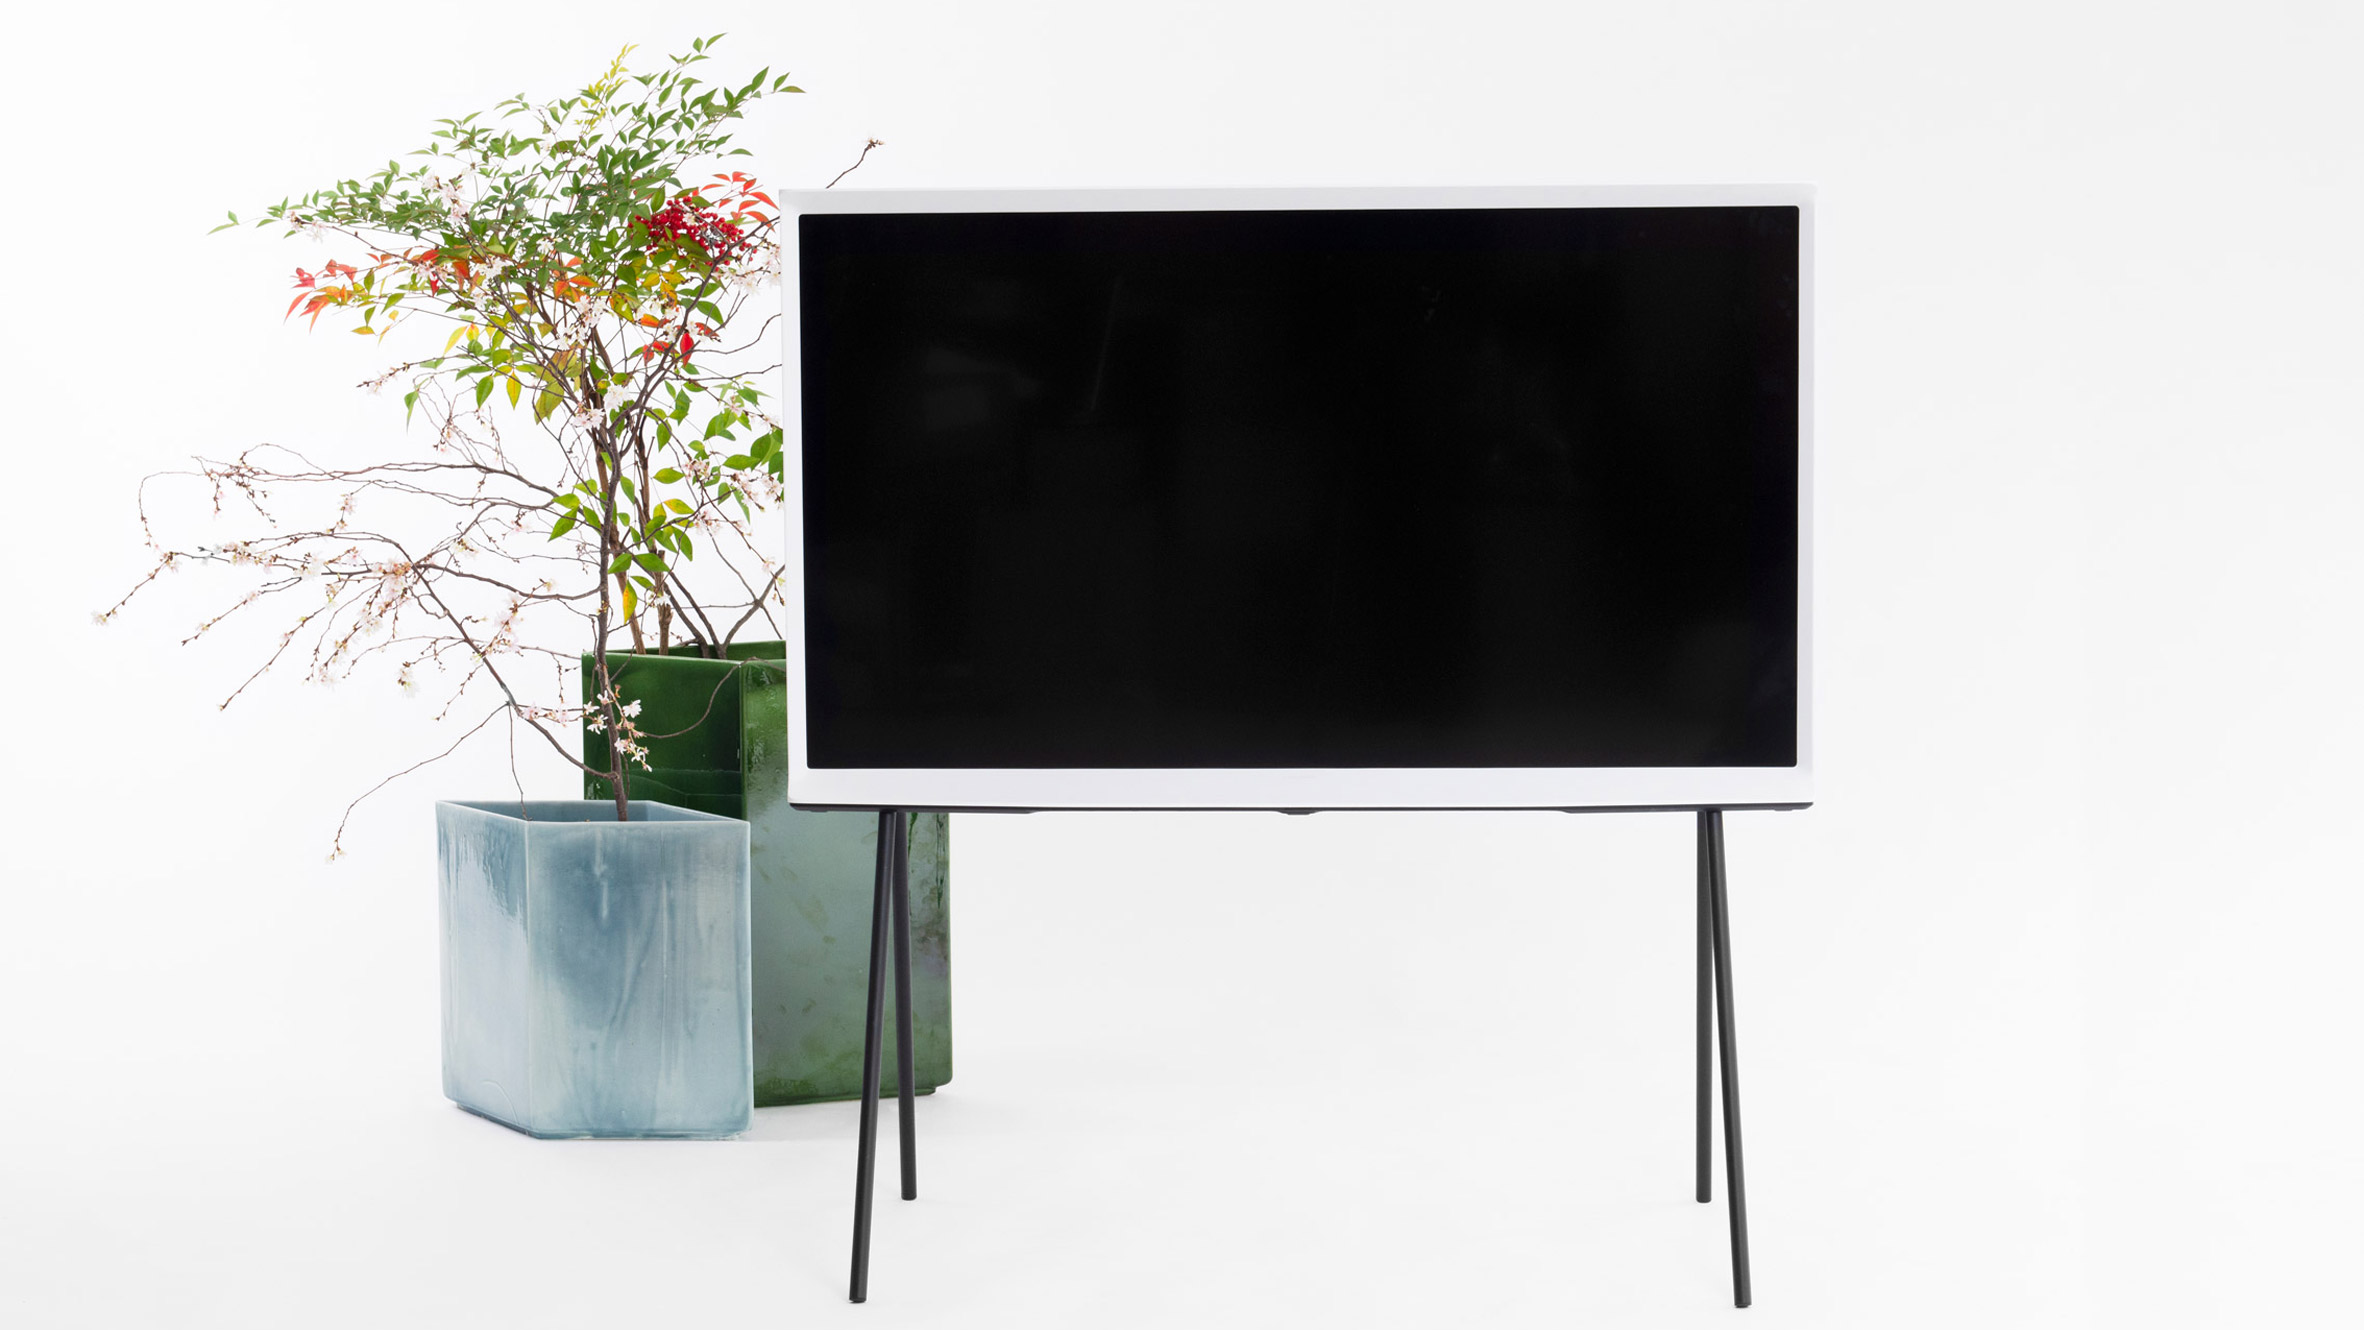 Samsung Serif 2.0 TV by the Bouroullec brothers